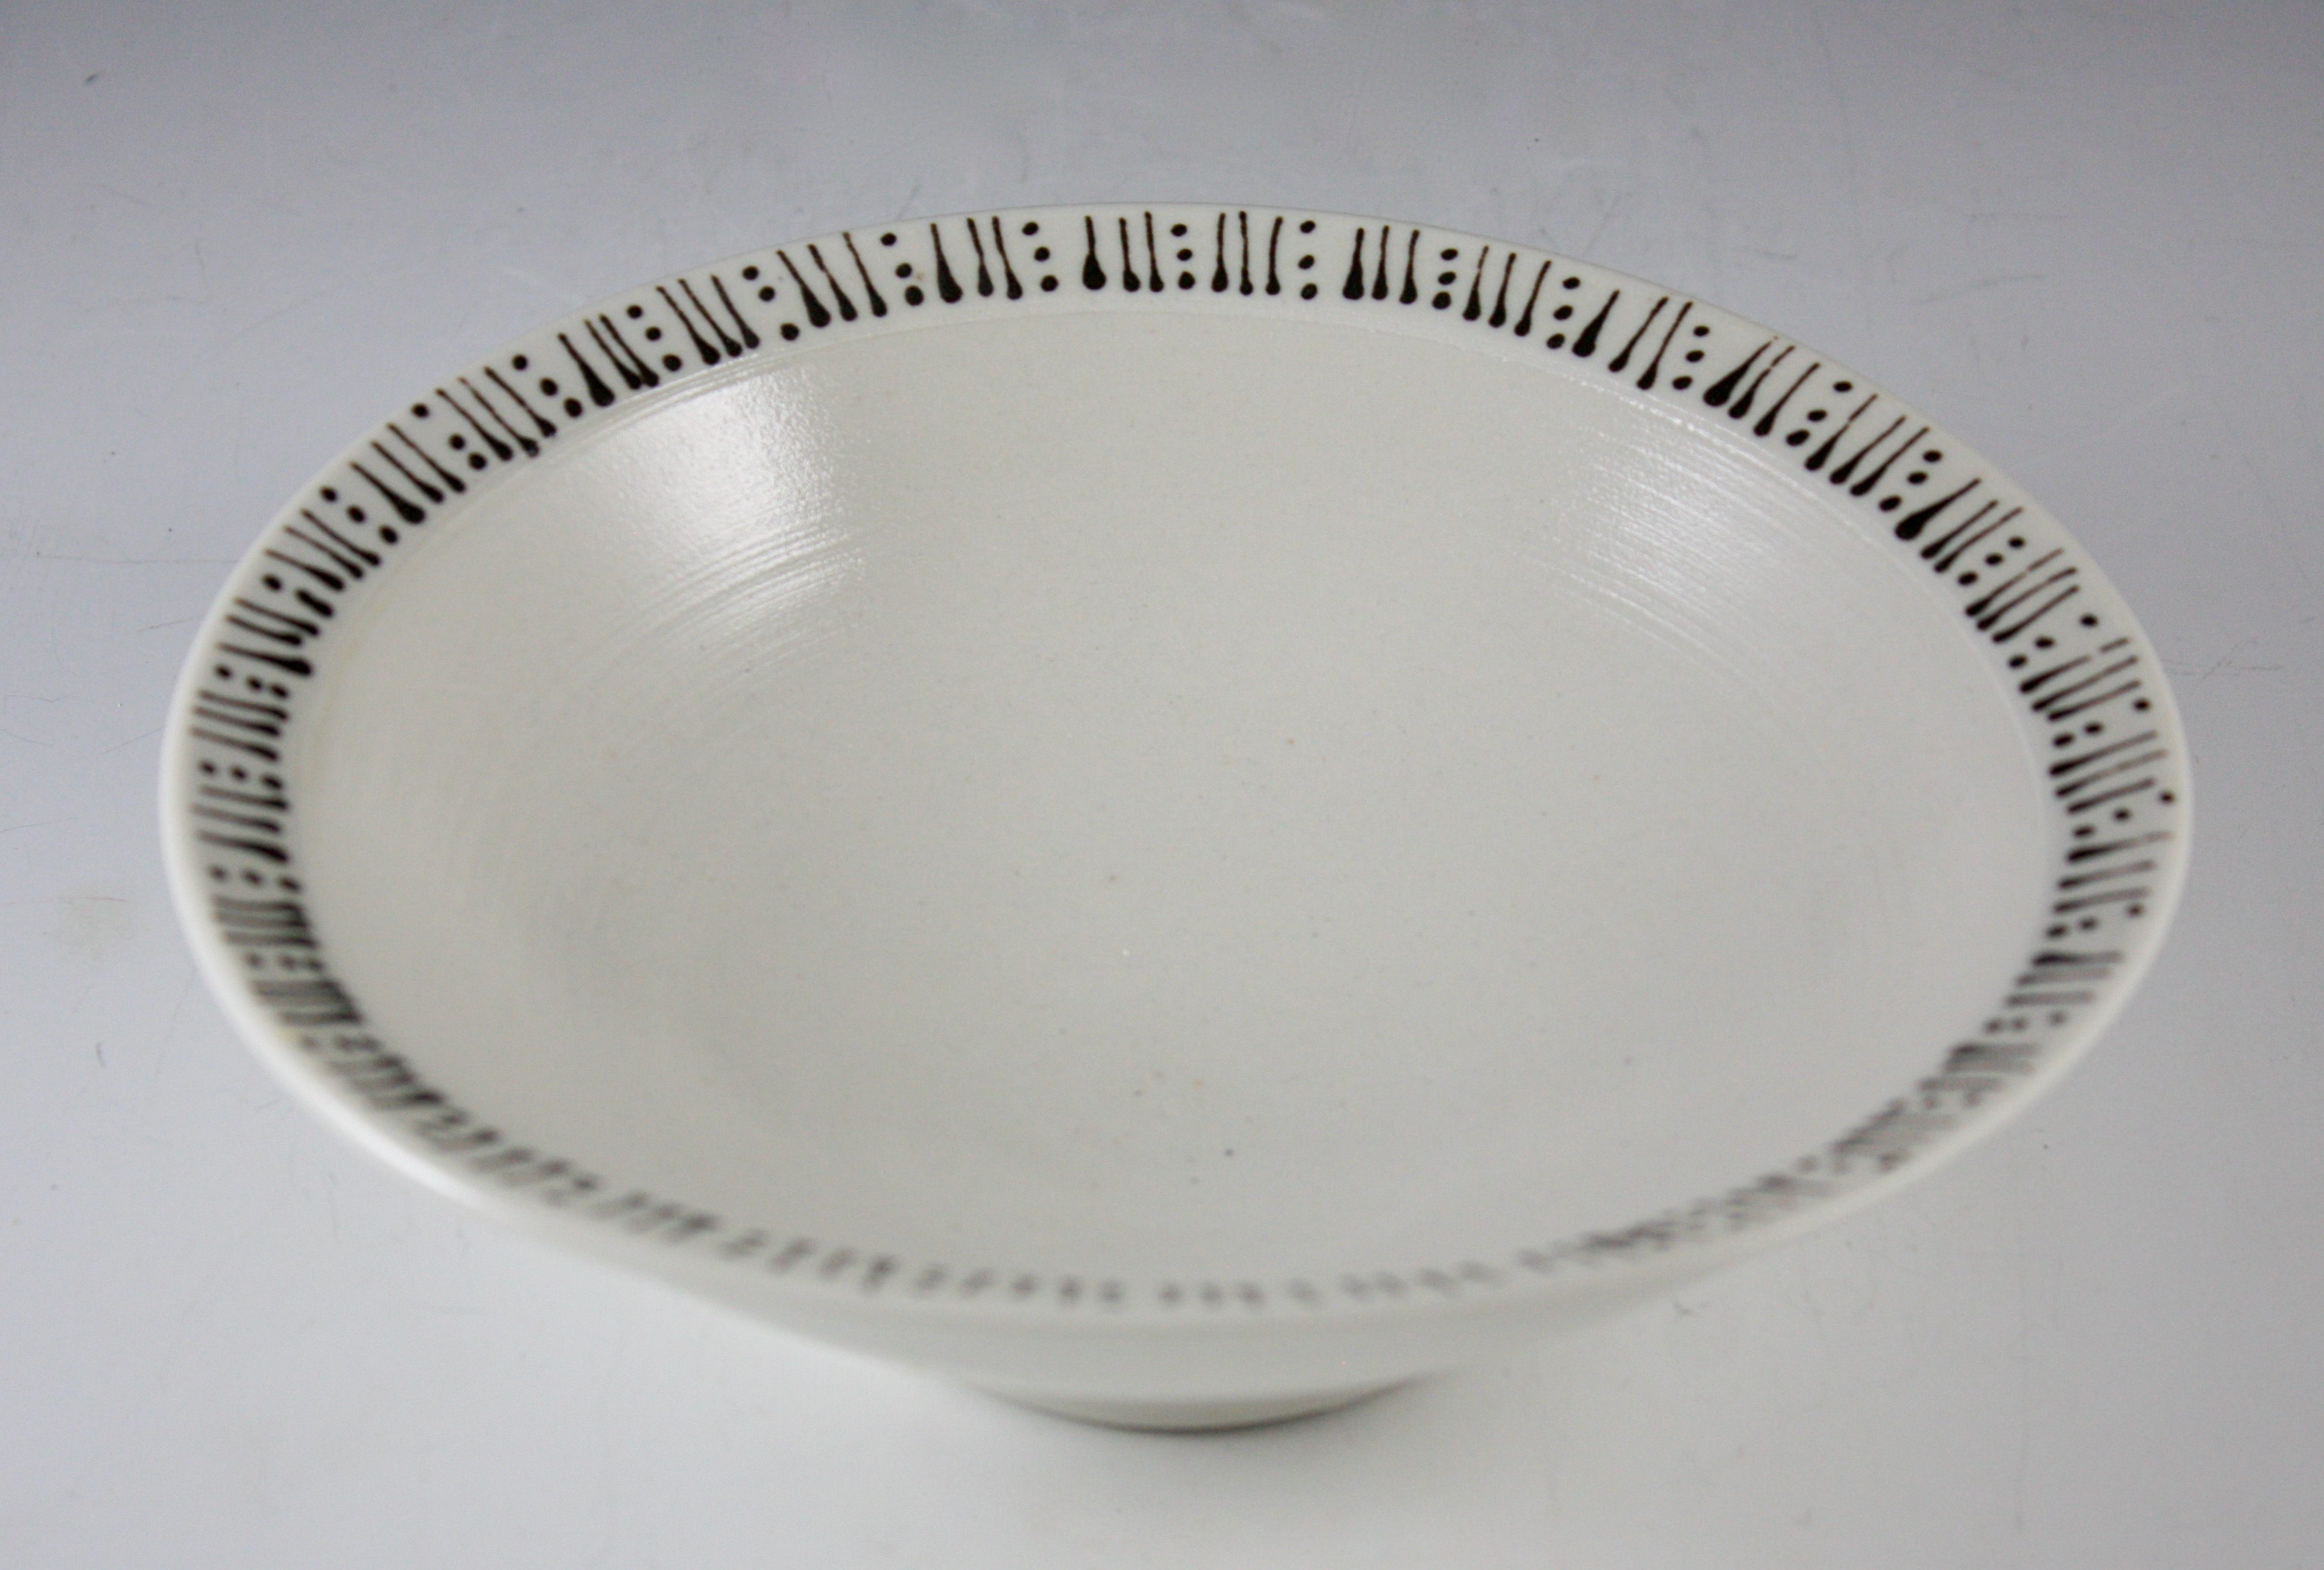 Porcelain Bowl with Black Dots & Dashes on Rim 21-312